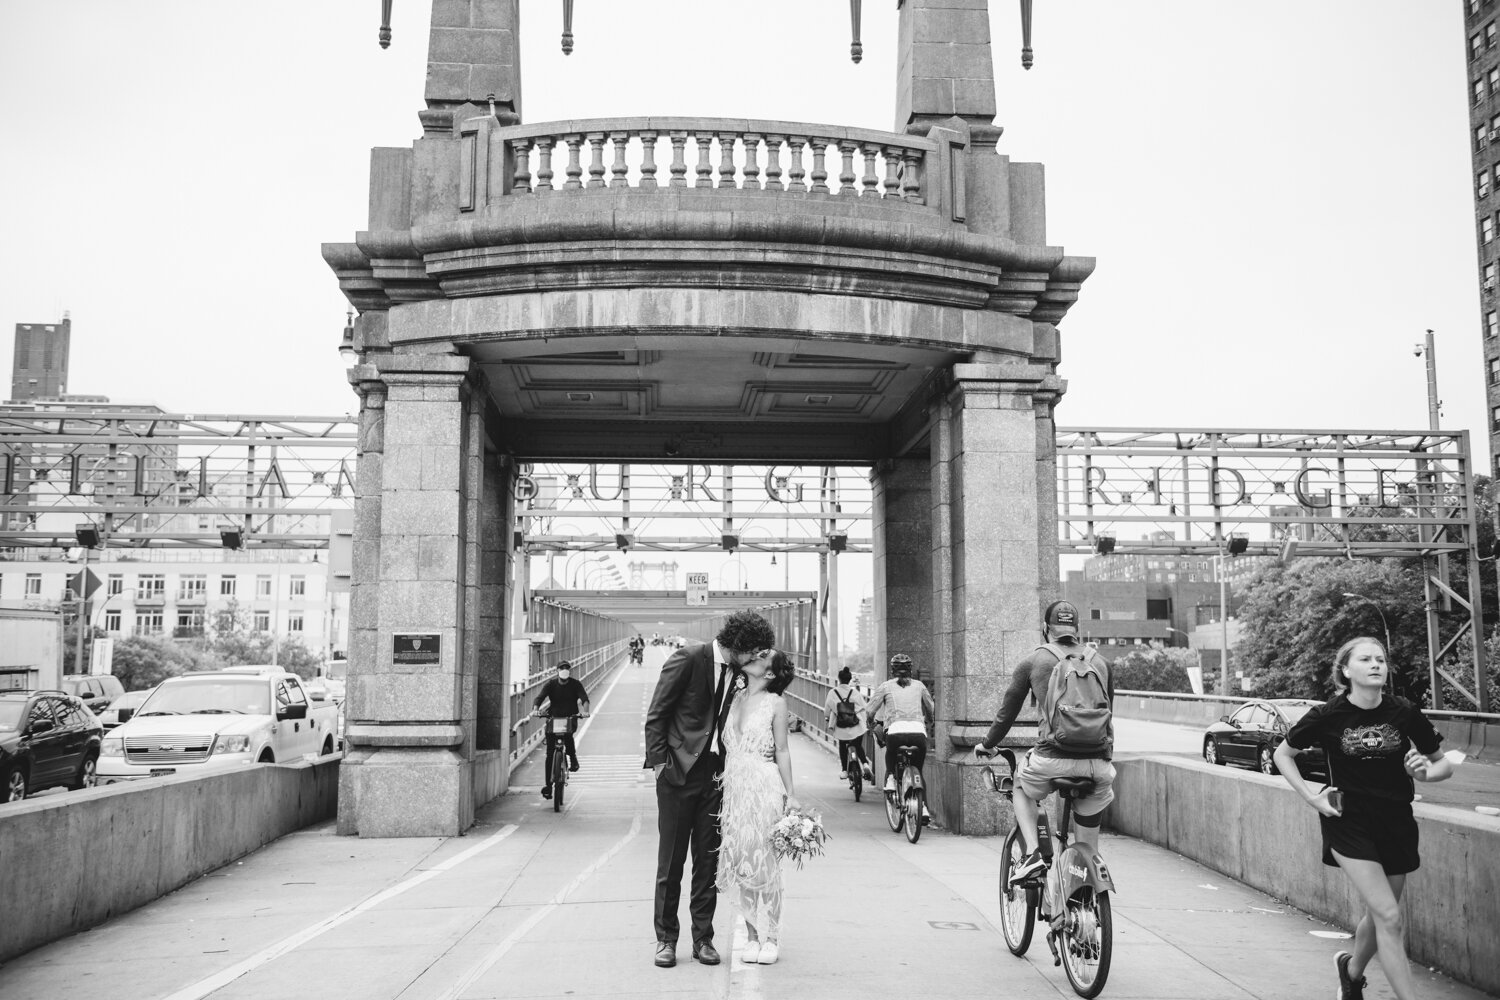 Bride and groom stand at the entrance to the Williamsburg Bridge and kiss below the sign that says "WILLIAMSBURG BRIDGE"Bicyclists and runners pass them on each side.

Central Park Wedding Photography. Williamsburg Bridge Bridal Portraits. Luxury NYC Wedding Photographer. Manhattan Micro Wedding.